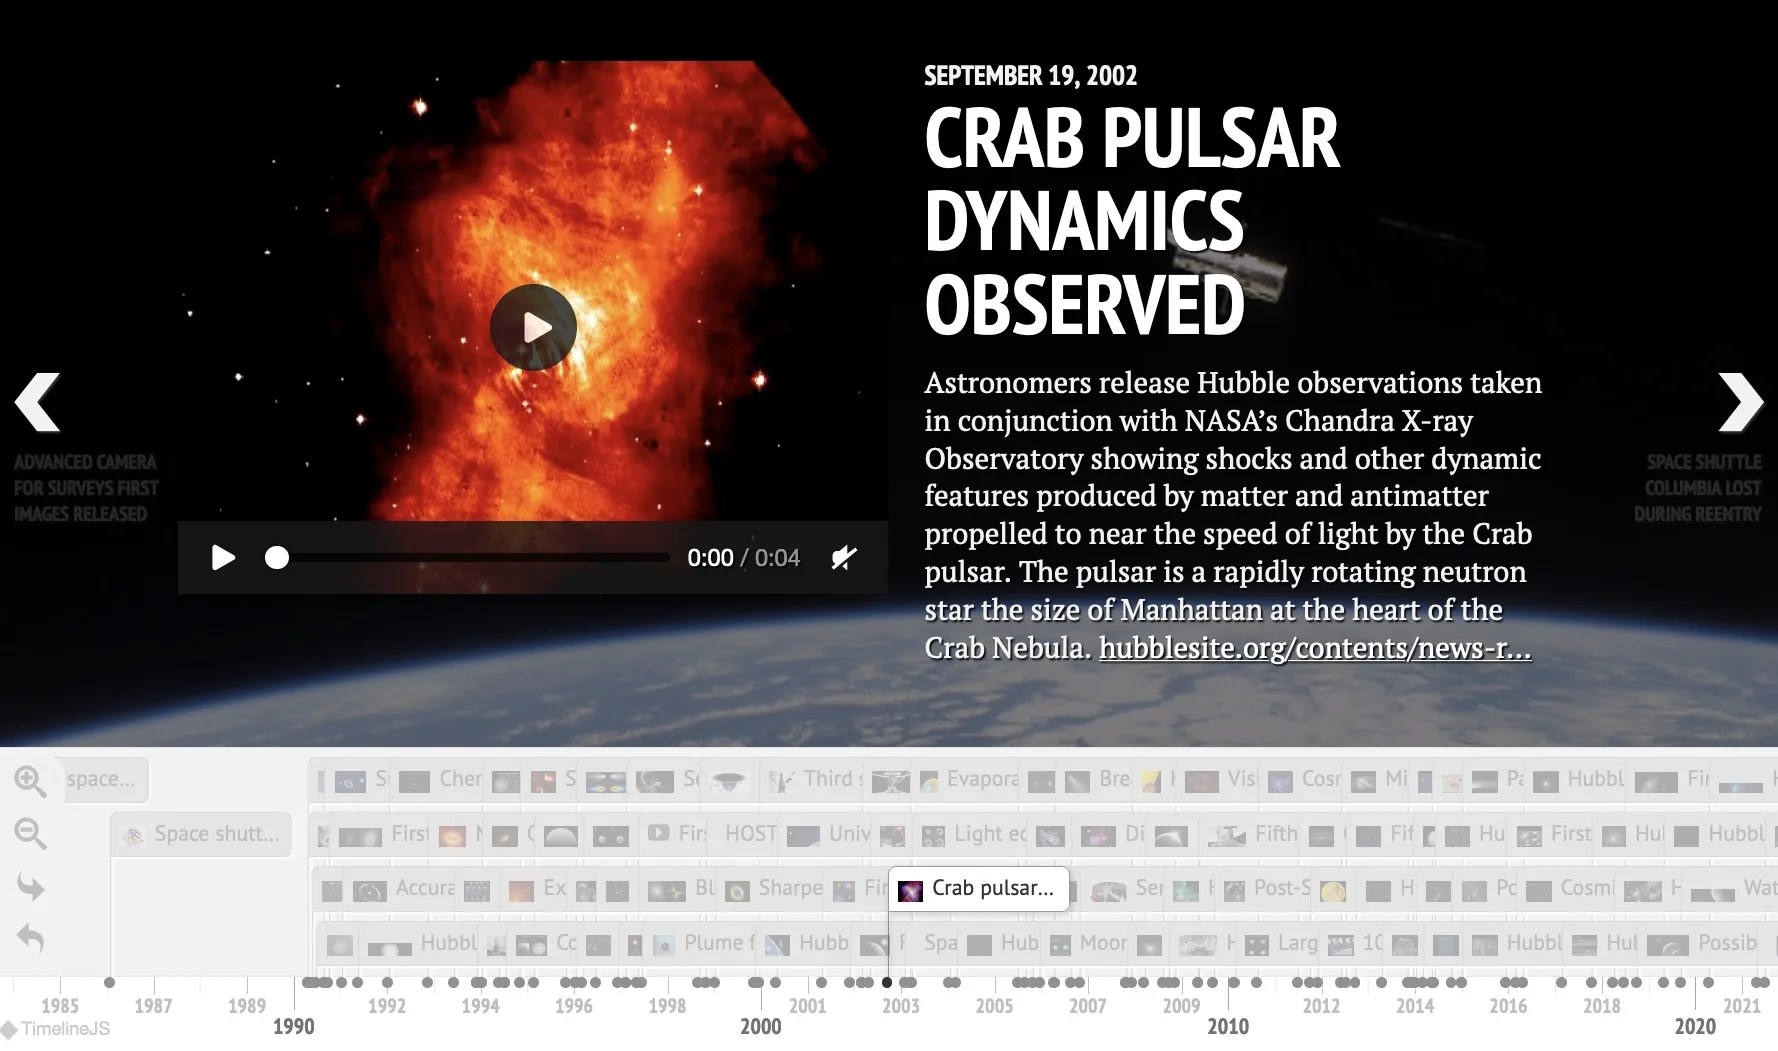 This image shows a screenshot of the Hubble History Timeline, displaying an image of the Crab Nebula's pulsar alongside descriptive text.